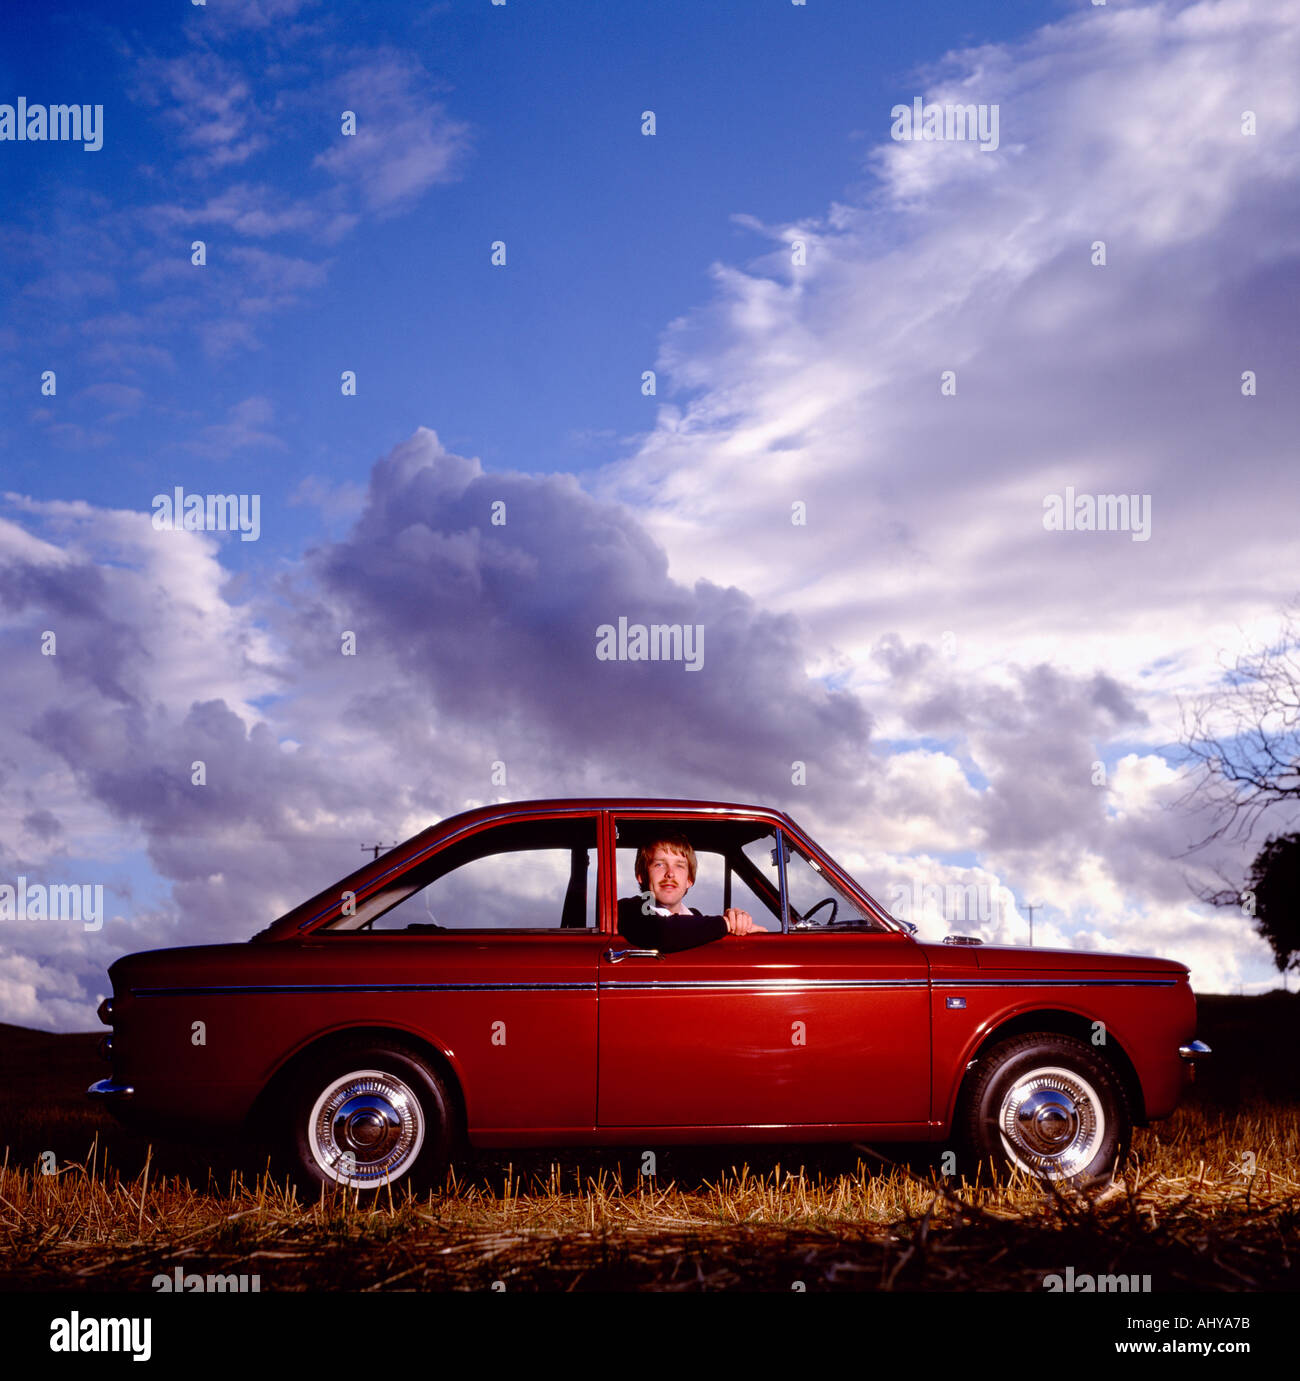 A Hillman Imp enthusiast in his car in England in Great Britain in the United Kingdom UK. Cars Hobby Modern Culture Classic Vintage Stock Photo